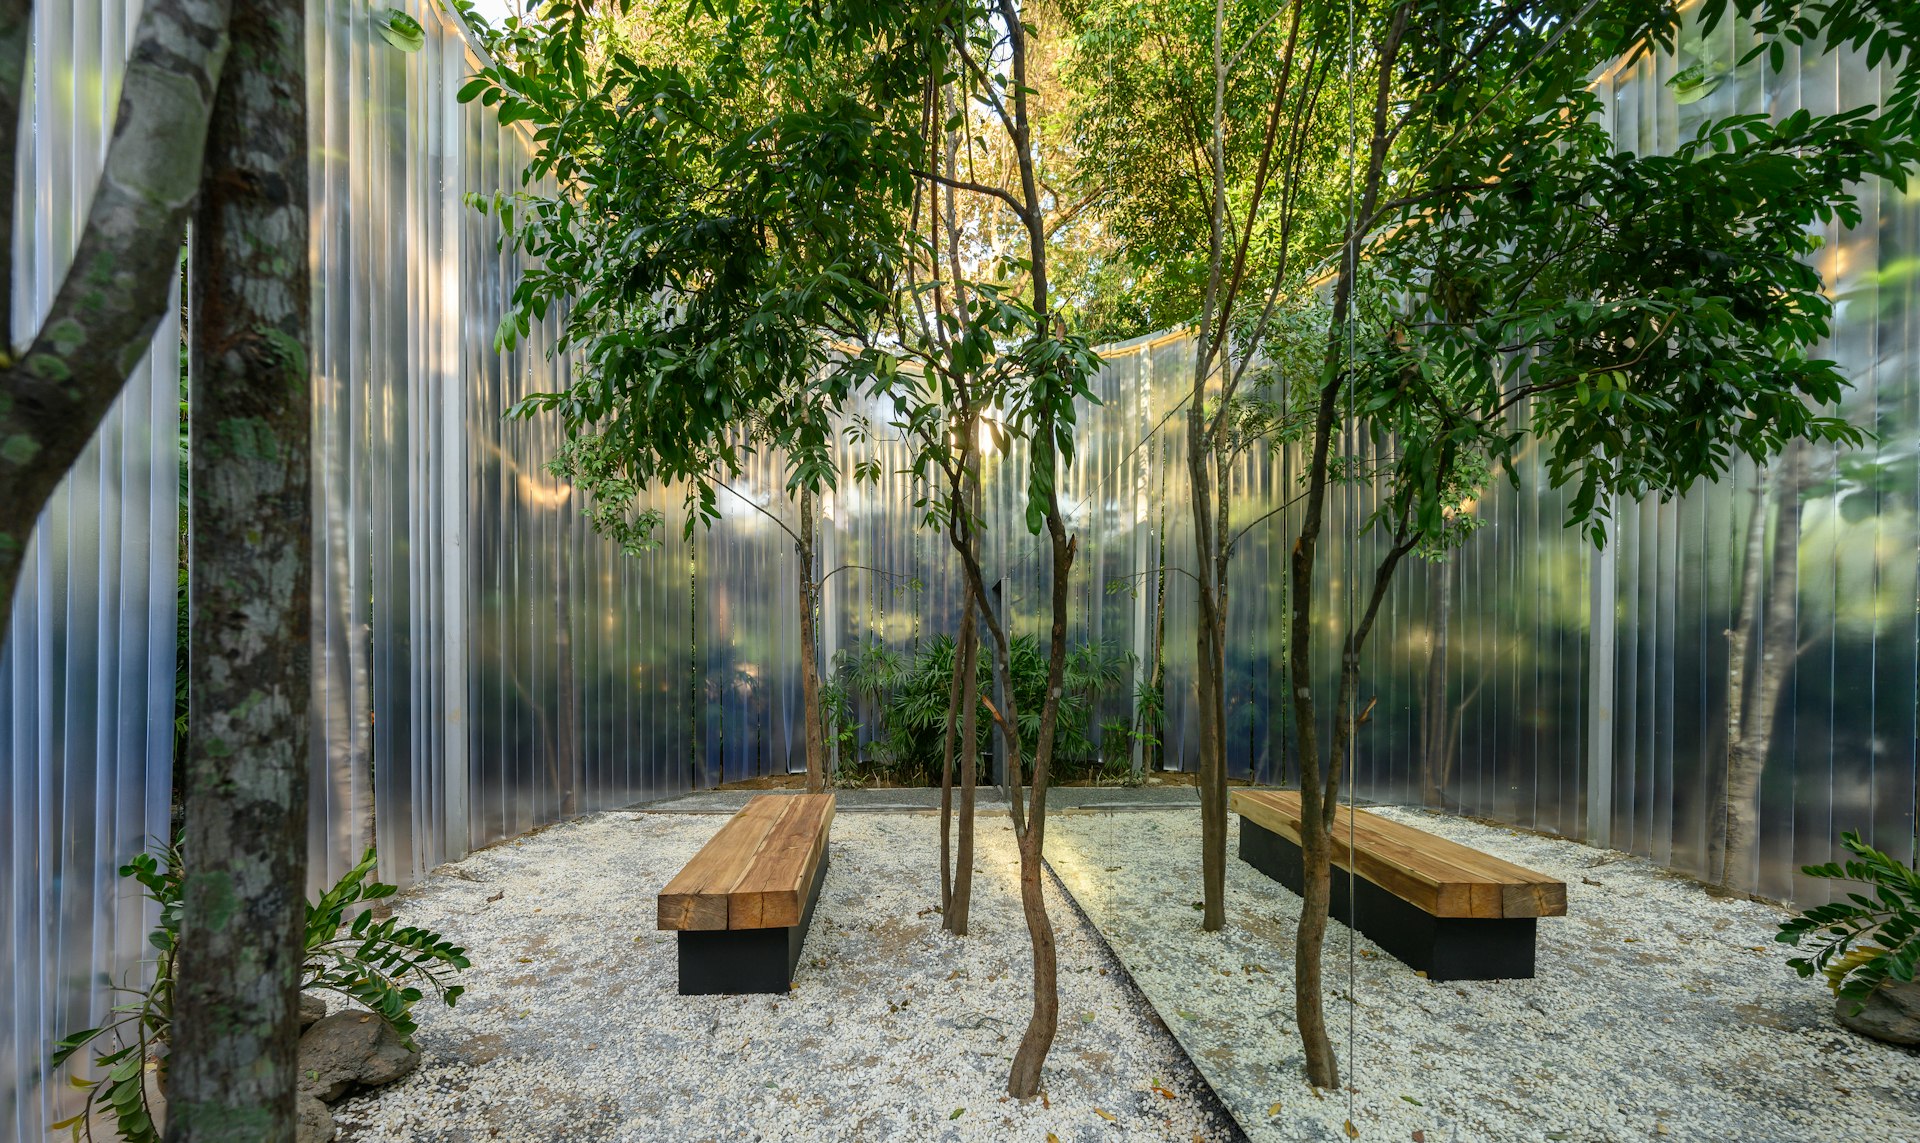 Cafe set within its own private forest in Chiang Mai, Thailand